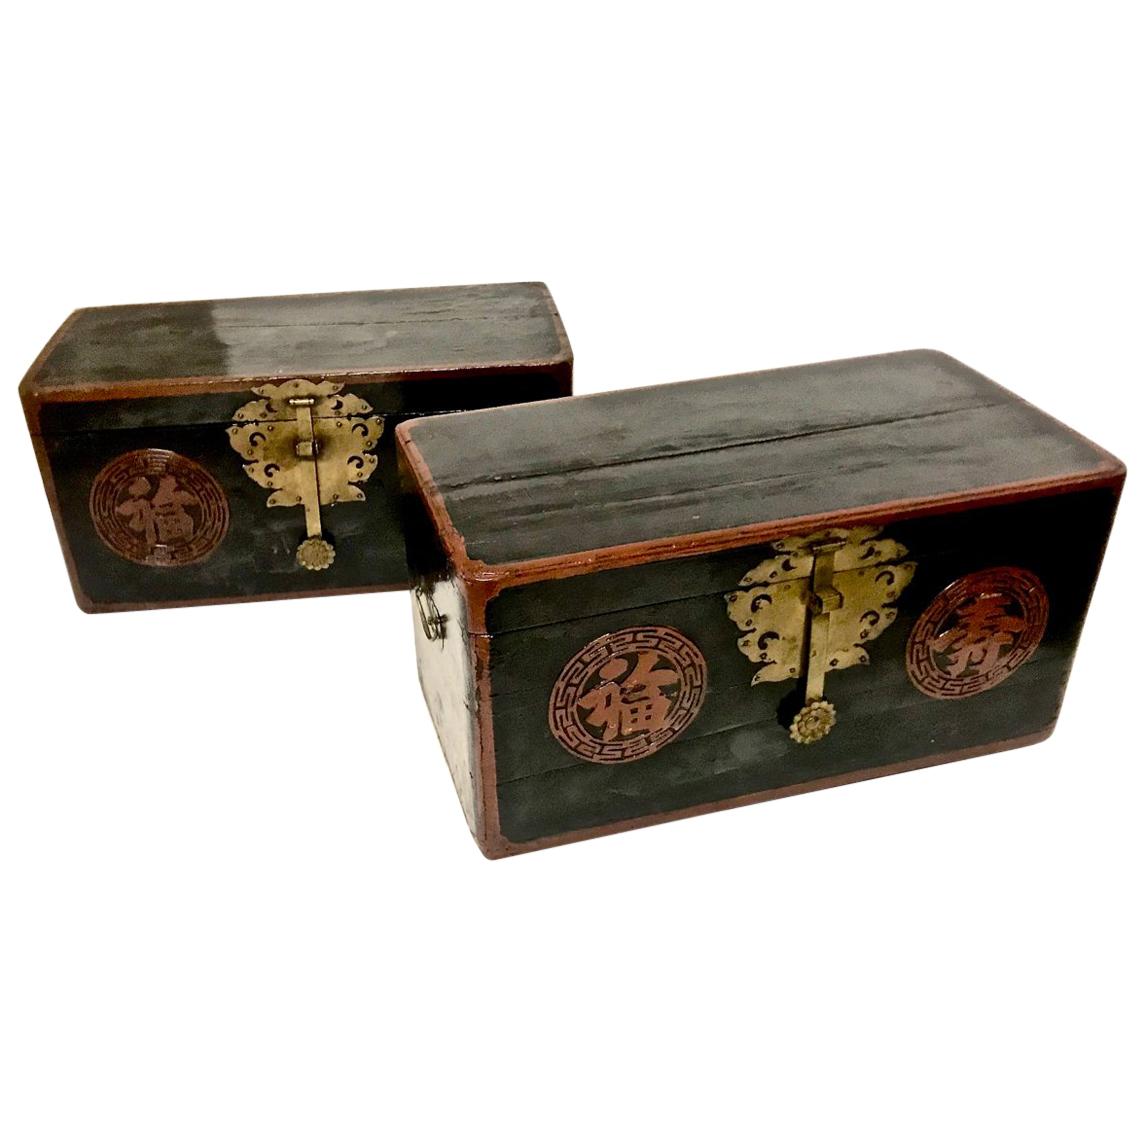 Pair of Small Asian Lacquer Boxes or Trunks, Late 19th Century